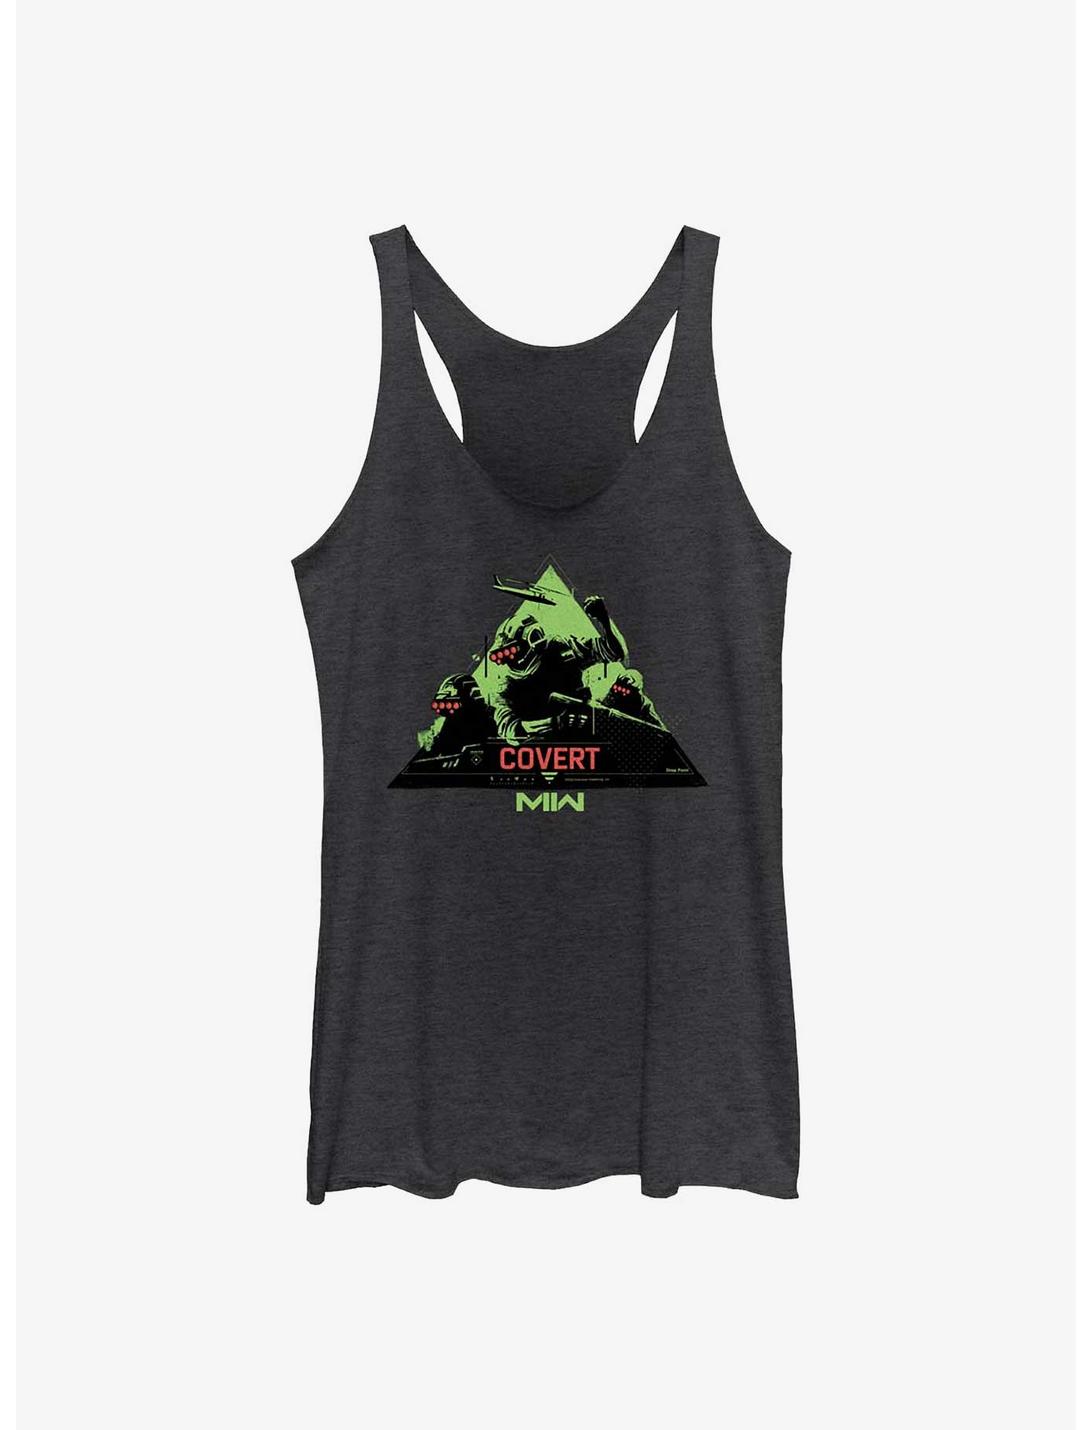 Call Of Duty Mission Covert Girls Raw Edge Tank, BLK HTR, hi-res